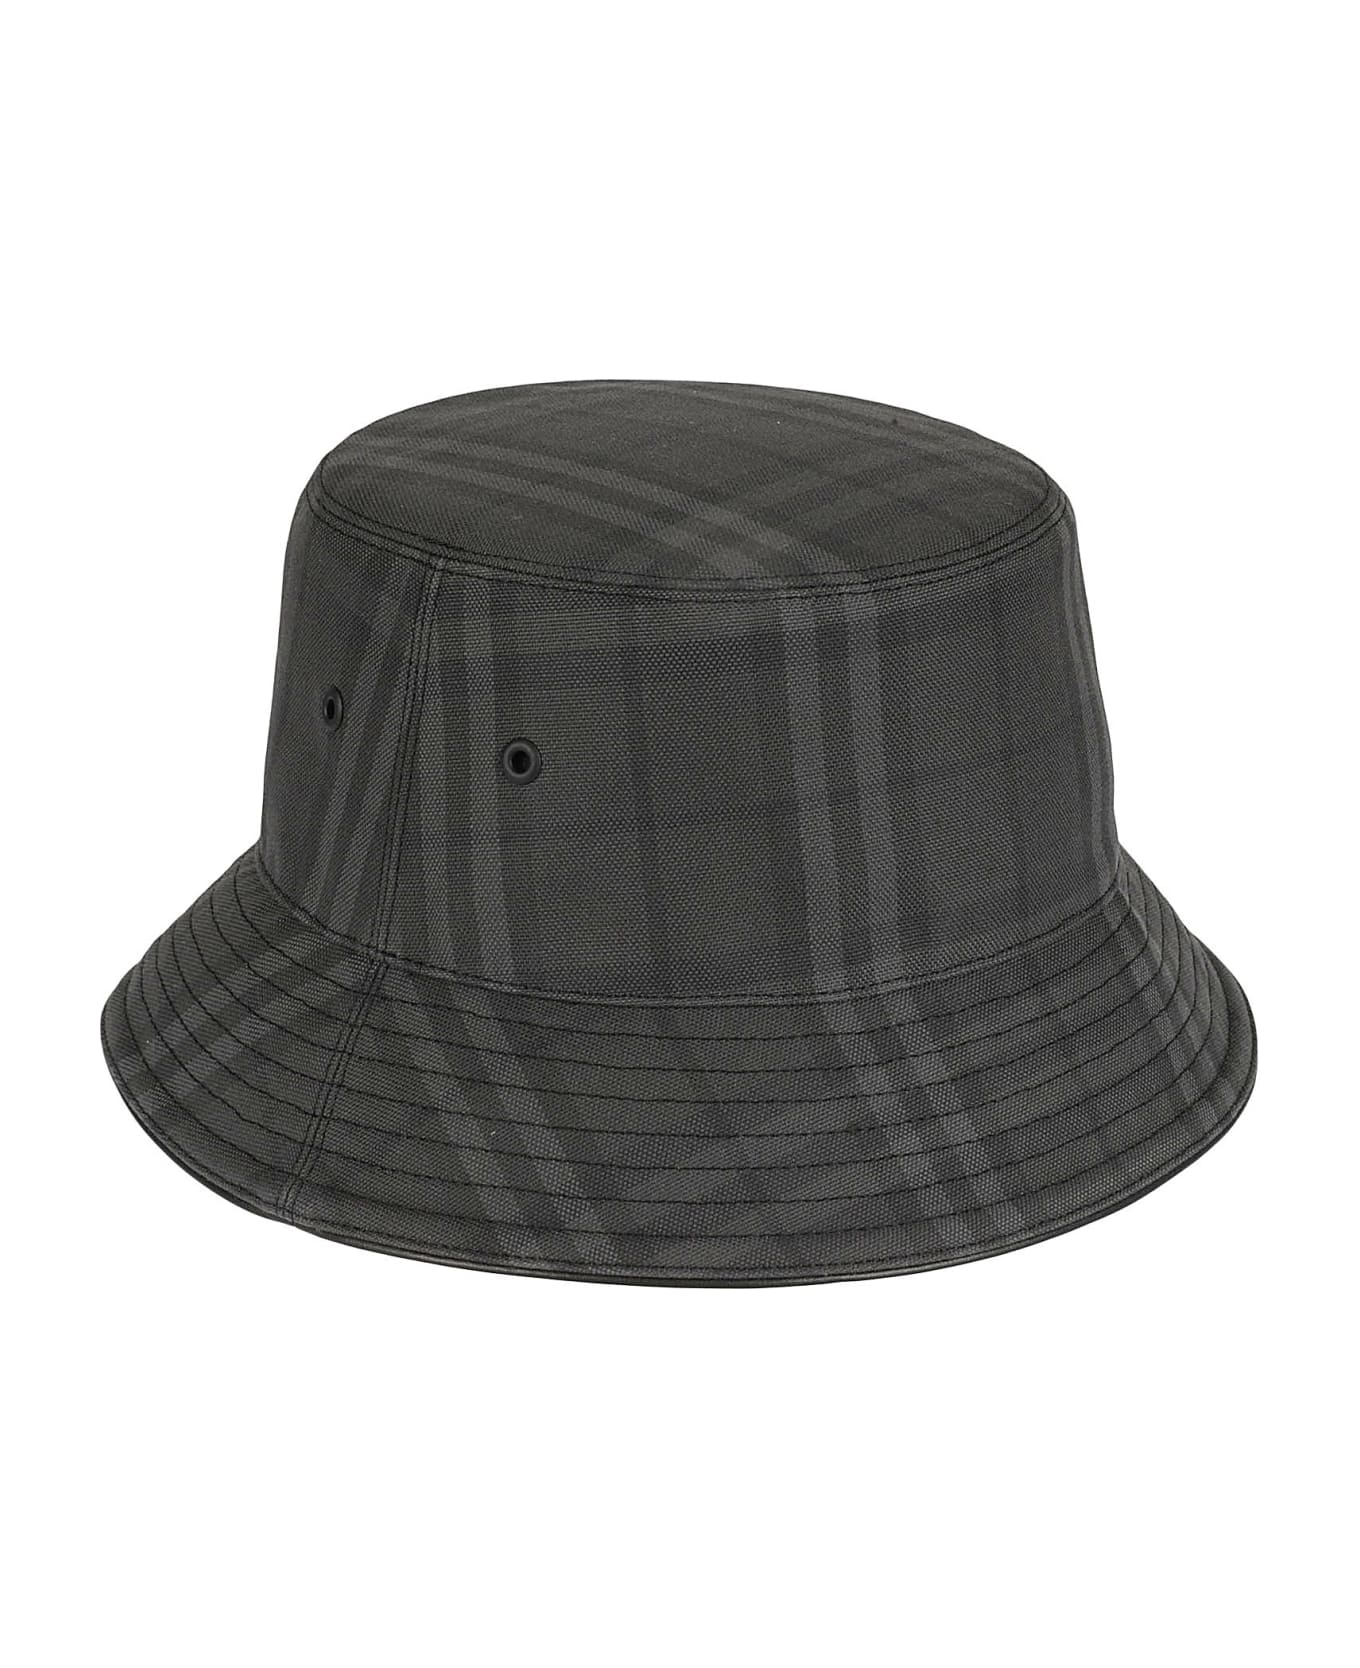 Burberry A-mh Bucket Hat - Charcoal